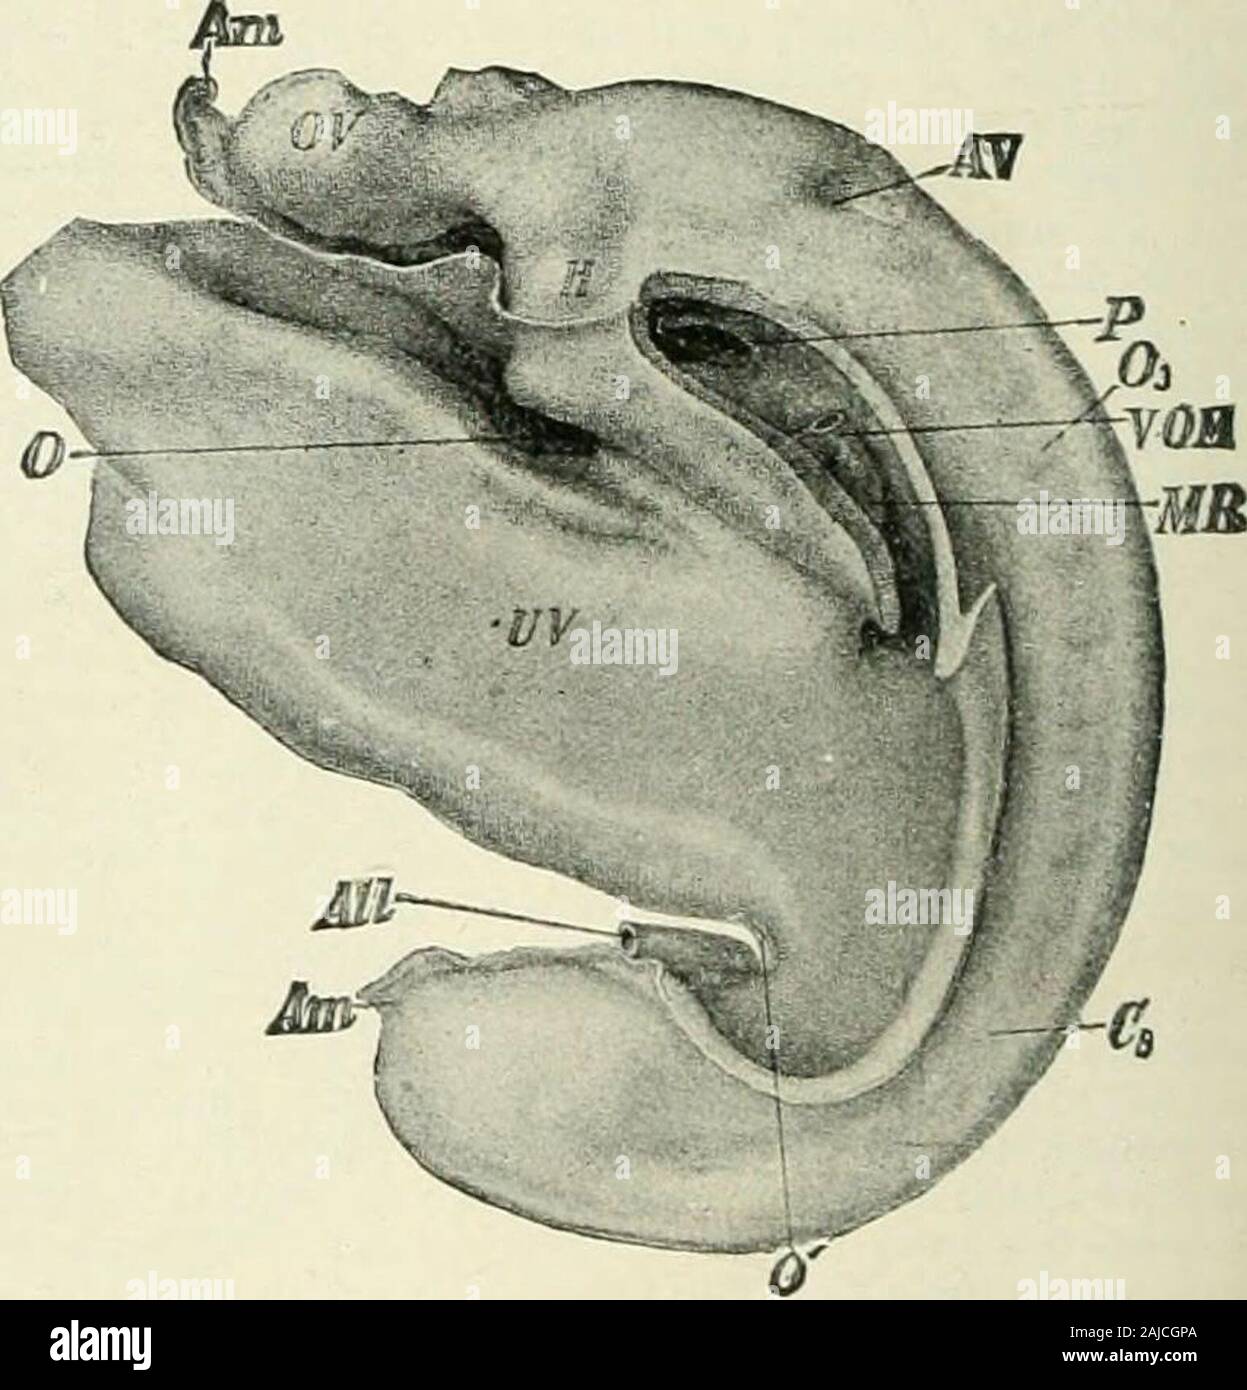 A Reference handbook of the medical sciences embracing the entire range of scientific and practical medicine and allied science . Fig. •&gt;U4.—Reconstruction of Embryo 2.11mm. Long. (Enlarged about 25 diameters.)al, Allantois; am, amnion; B, bellystalk ; ch, chorion ; )i, heart.; nis. nieso-dermic somite; ot^, oral fossa; ph. pha-rynx ; r, chorionic villi; 1, yolk-sac.(After Eternod.). Fig. 5143.—Profile Reconstruction of the Embr.vo, 2.1 mm. Long. No.XII. X 37 times, ^m, Amnion; OT, optic vesicle ; -il, auditoryvesicle; LF. umbilical vesicle; H, heart; TO-Vf, omphalo-mesen-teric vein; MR. se Stock Photo